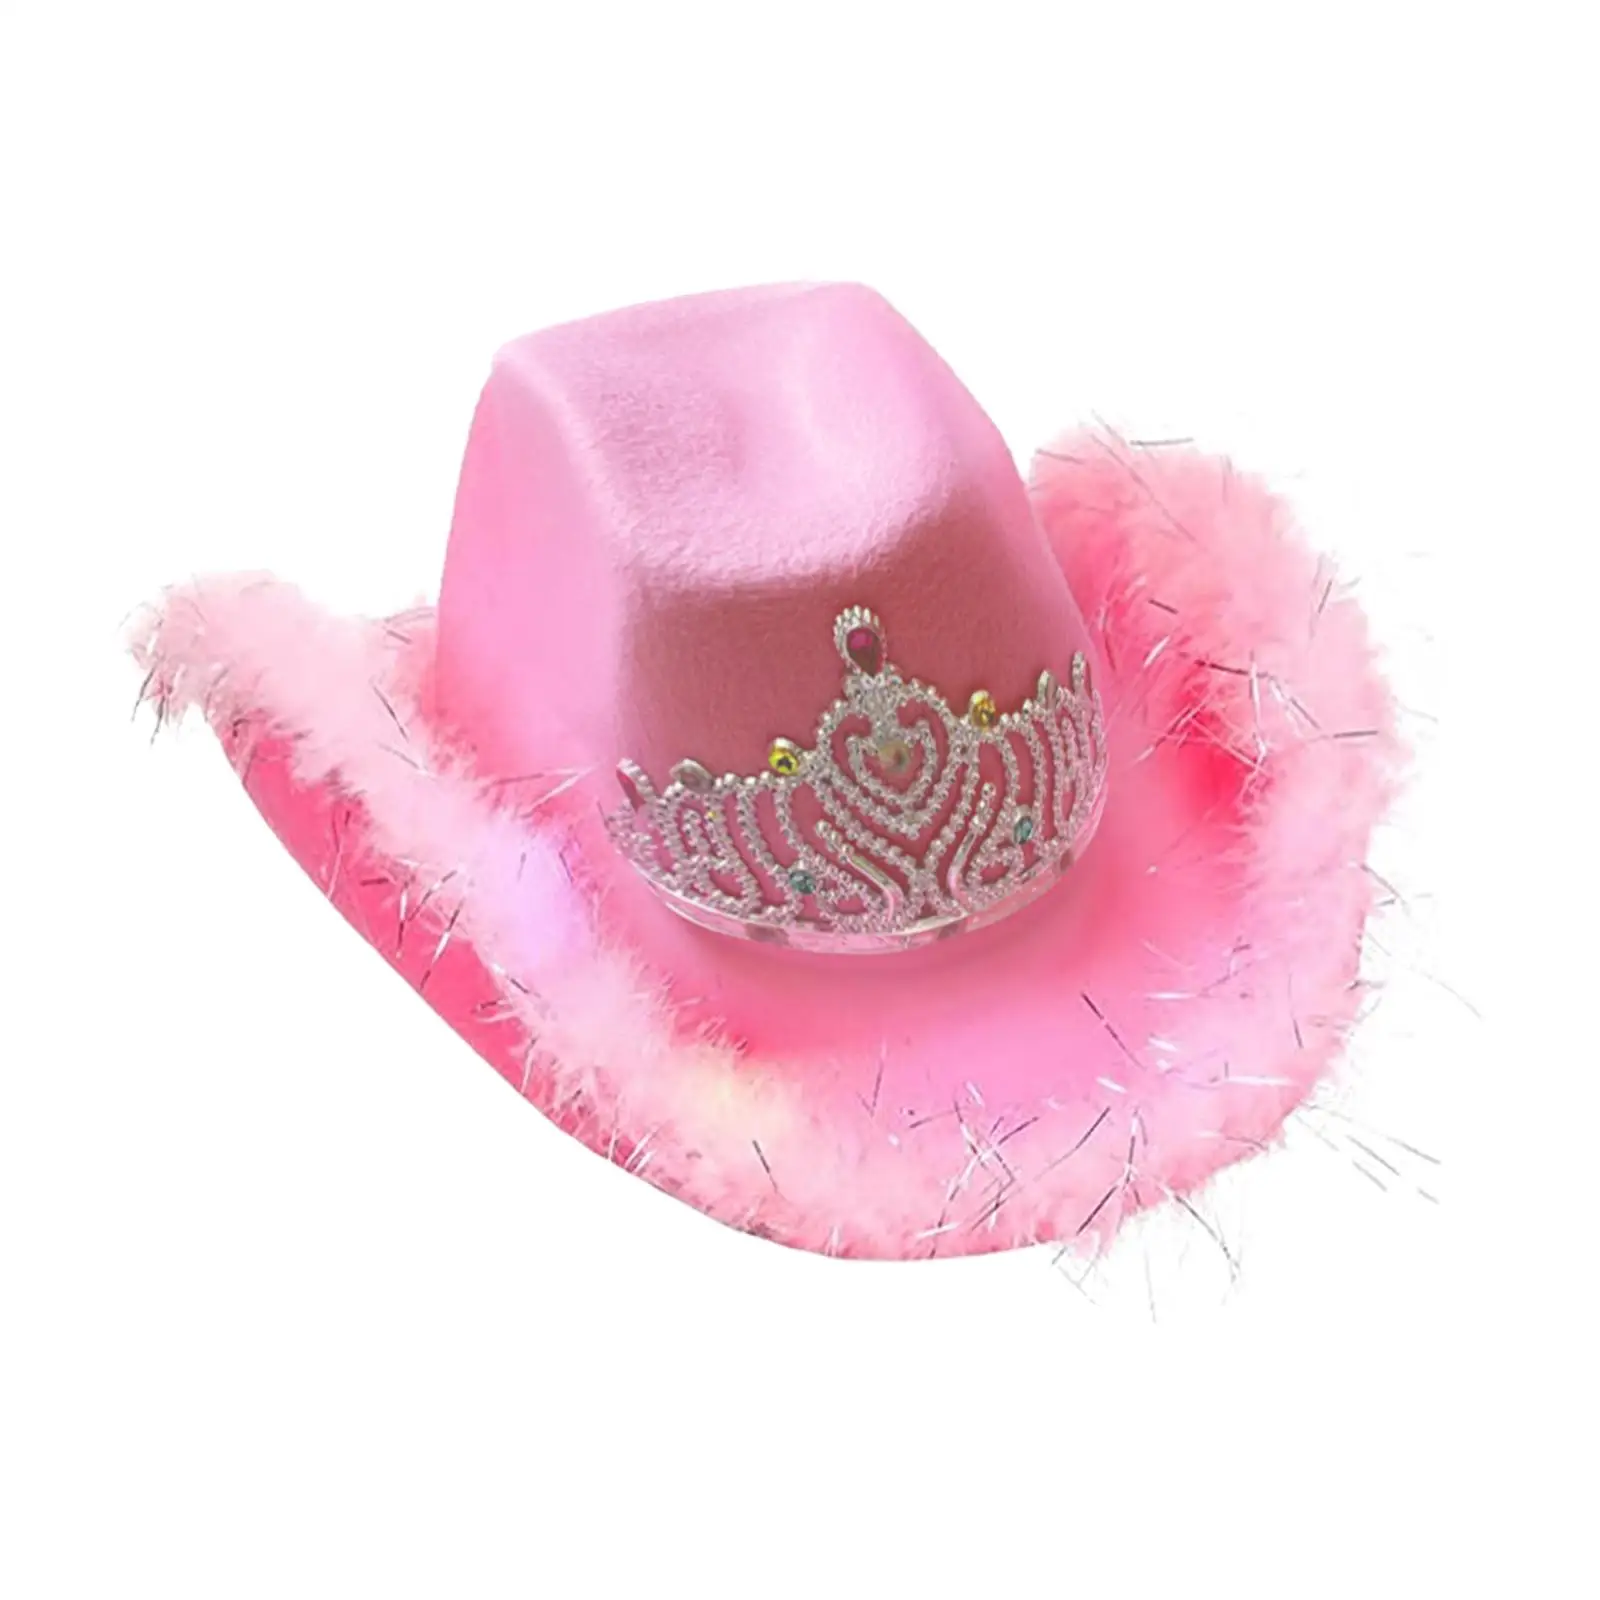 Light up Pink Cowboy Hat with Crown One Size Fits Most Wide Brim for Party Fancy Dress Props Hen Night Party Costume Accessories